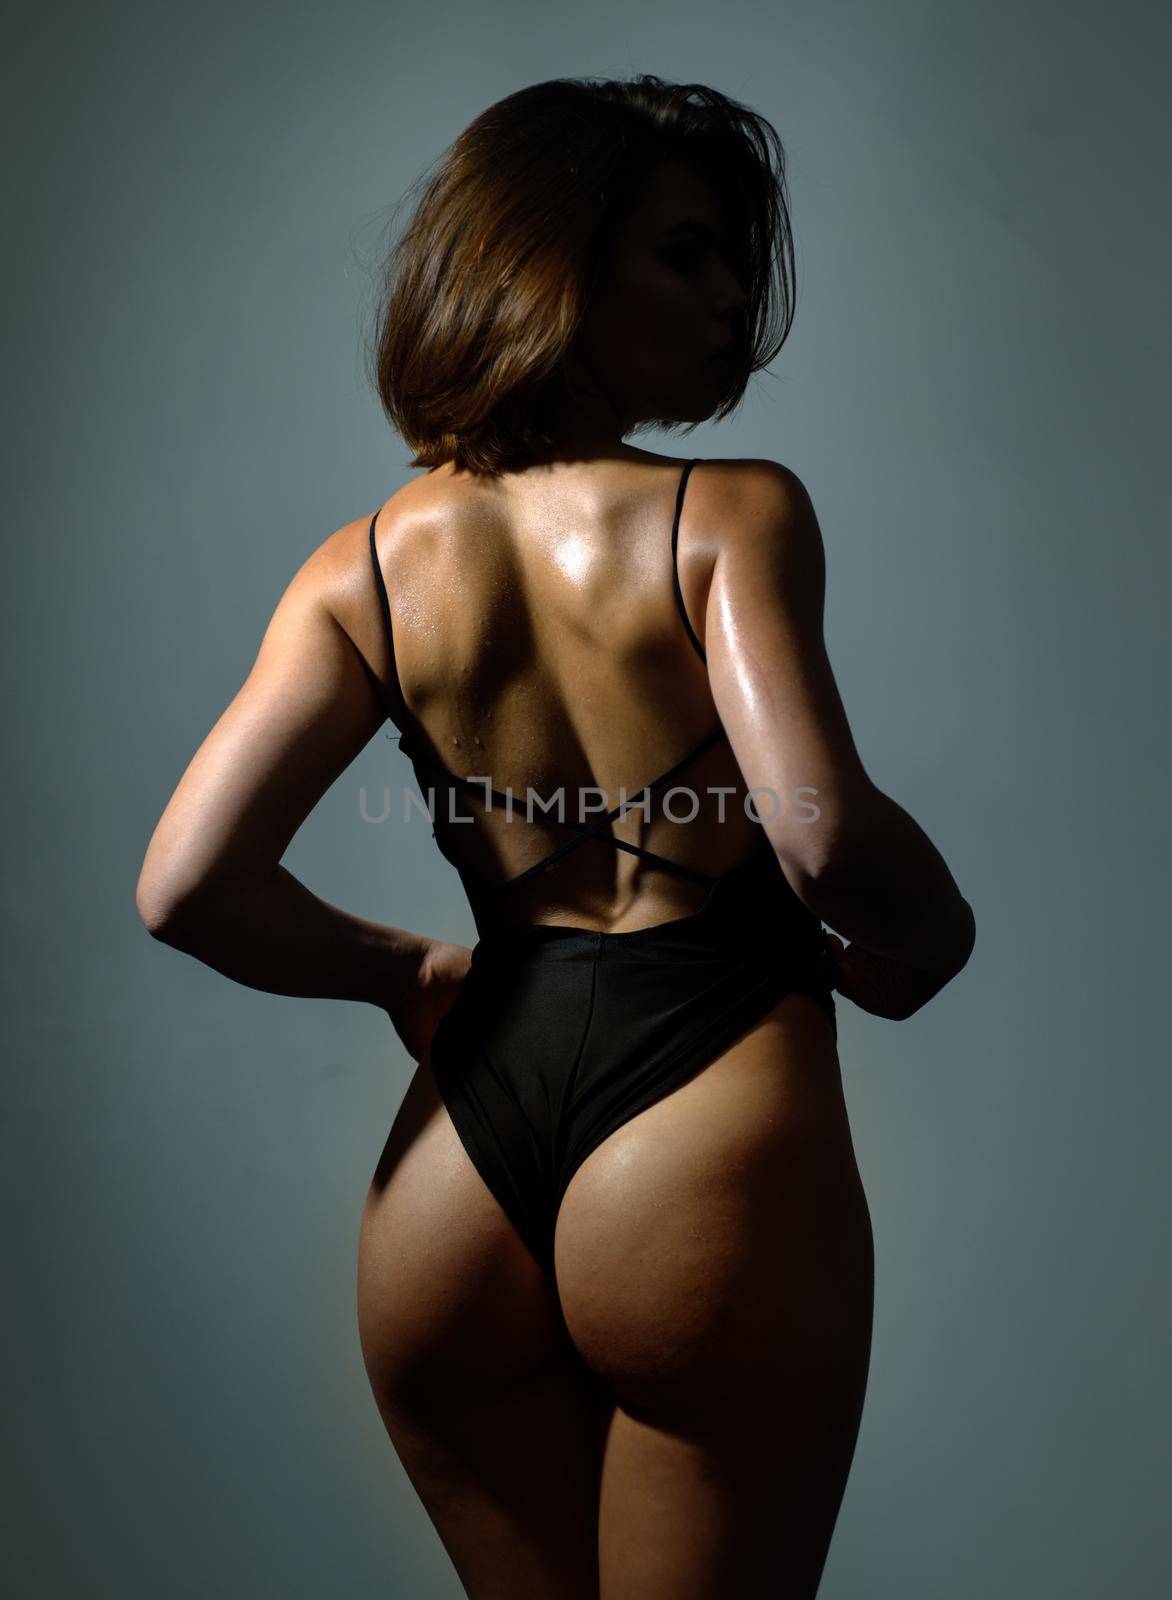 Sexy back beautiful ass slim woman with short dark hair isolated at grey background. Adorable charming woman with perfect body wearing sexy black lingerie. Hot butt concept